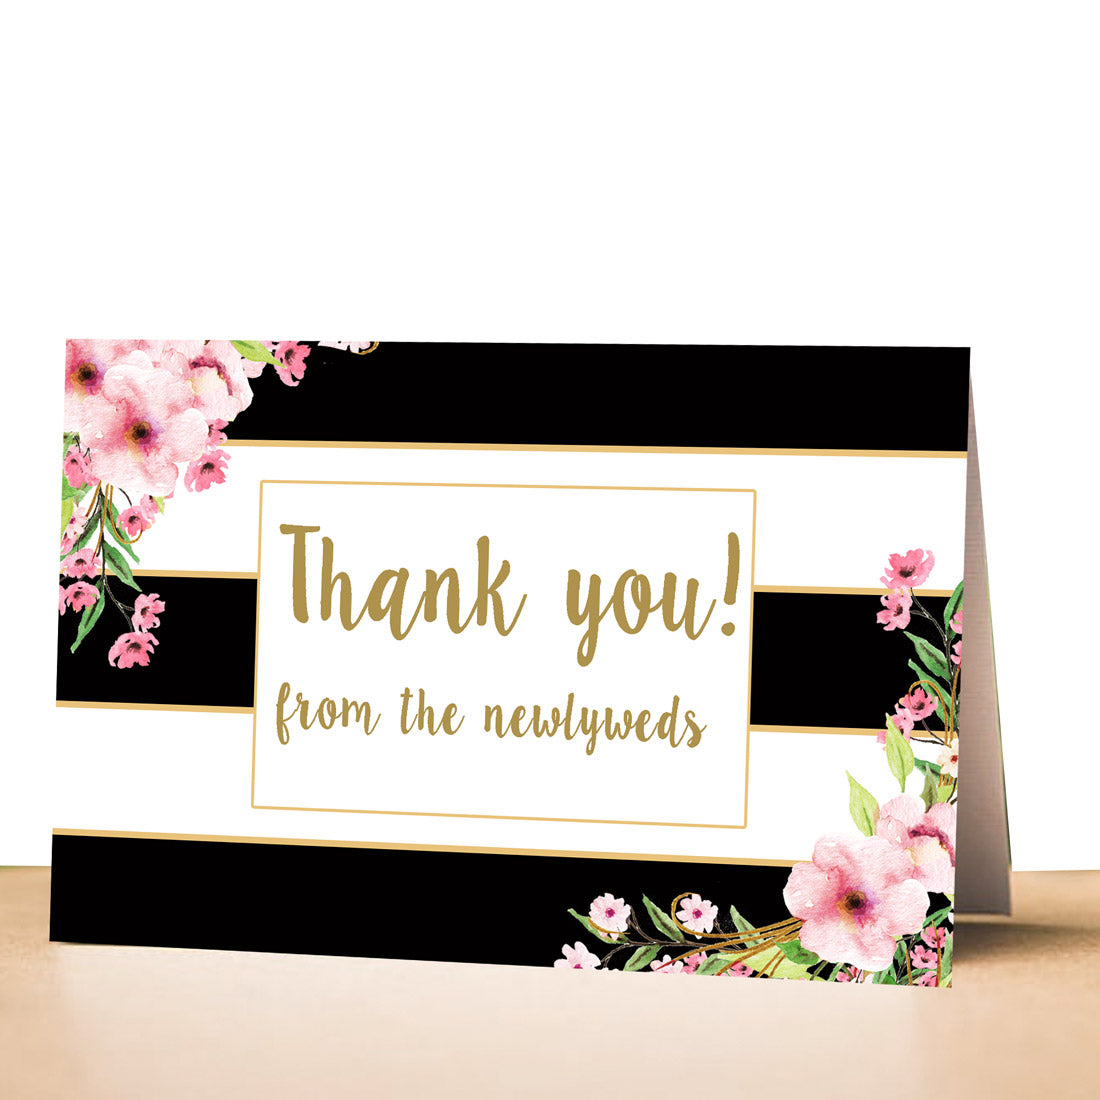 30 Blush pink gold glitter striped invitation thank you card blank – Pink  the Cat